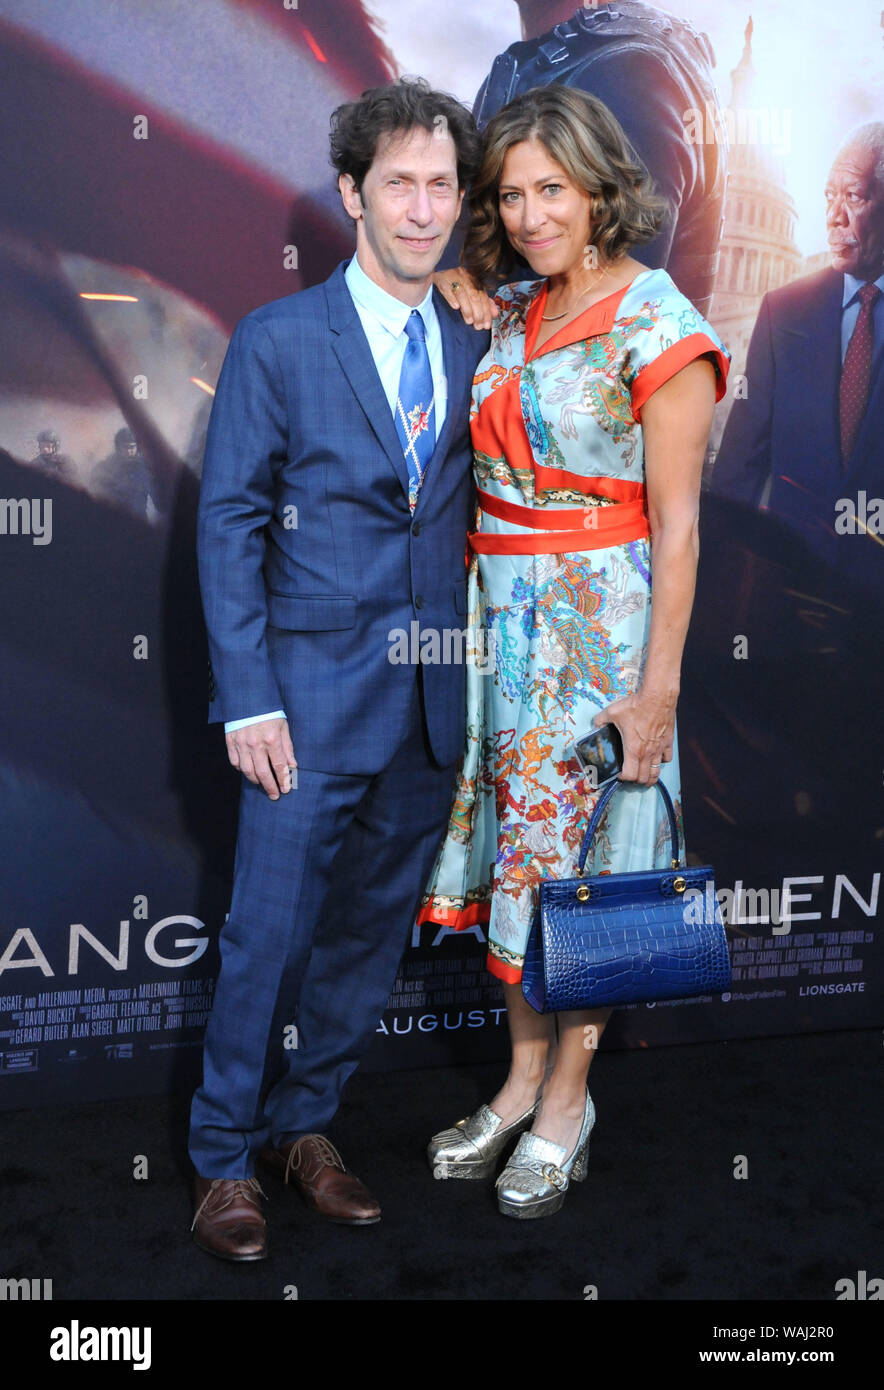 Los Angeles, California, USA 20th August 2019 Actor Tim Blake Nelson and wife actress Lisa Benavides attend the Lionsgate' 'Angel Has Fallen' Los Angeles Premiere on August 20, 2019 at Regency Village Theatre in Los Angeles, California, USA. Photo by Barry King/Alamy Live News Stock Photo